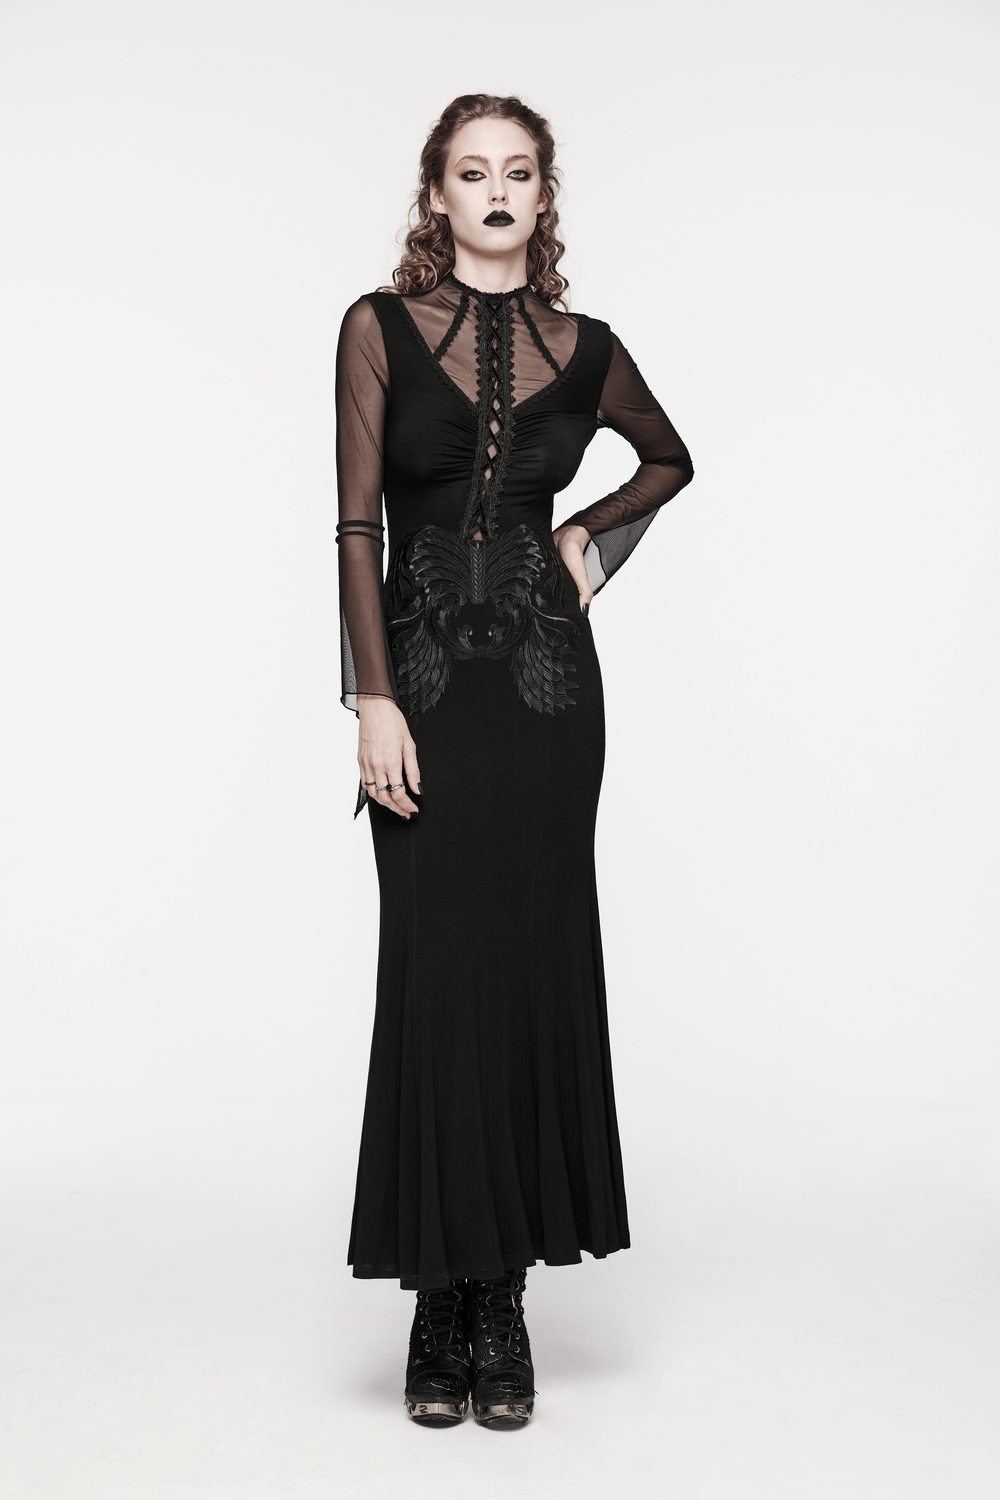 Gothic Women's Lace and Embroidery Mesh Dress